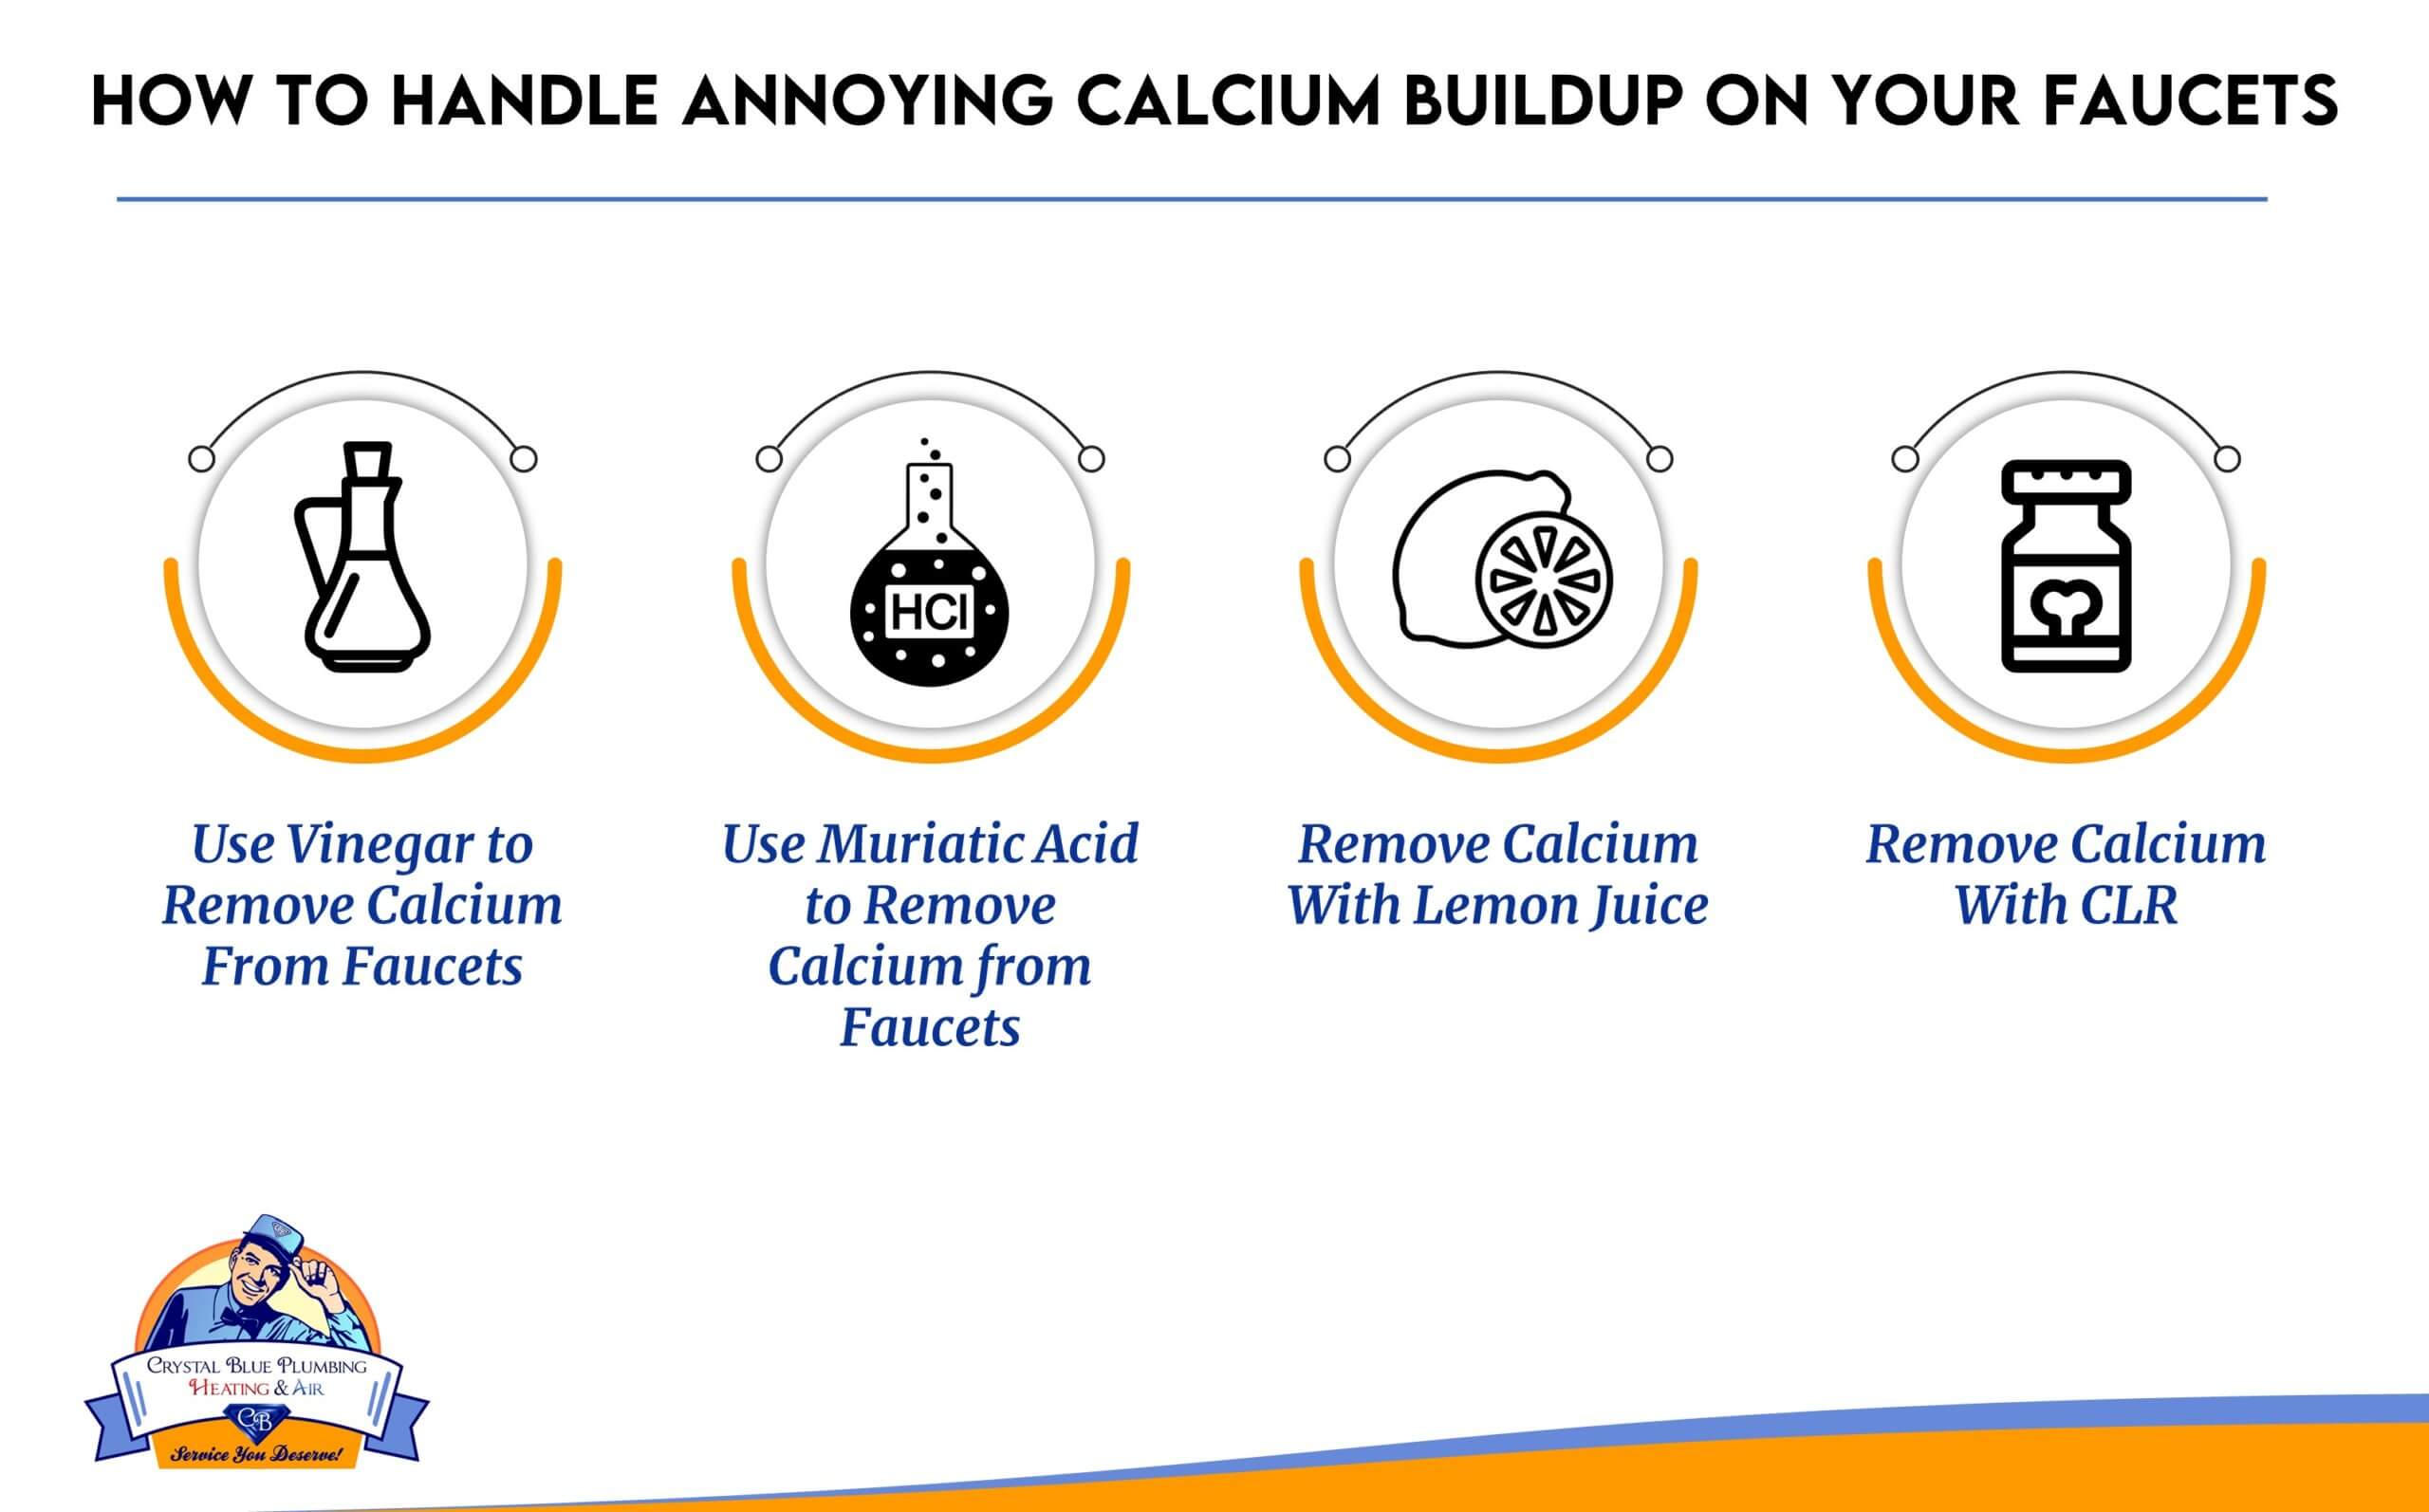 How To Handle Annoying Calcium Buildup On Your Faucets